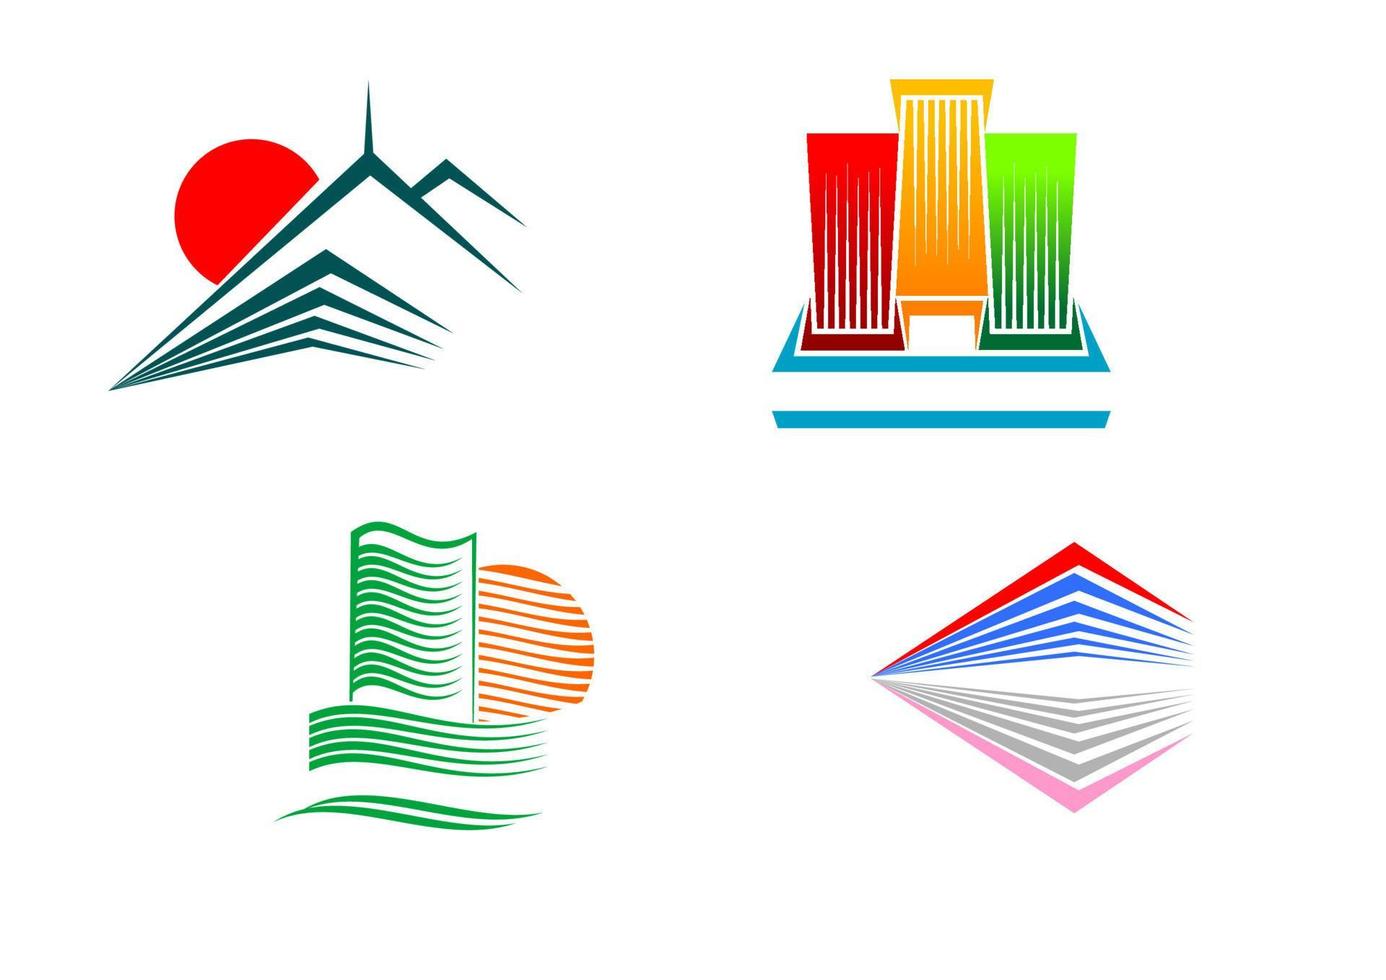 Buildings symbols and icons vector